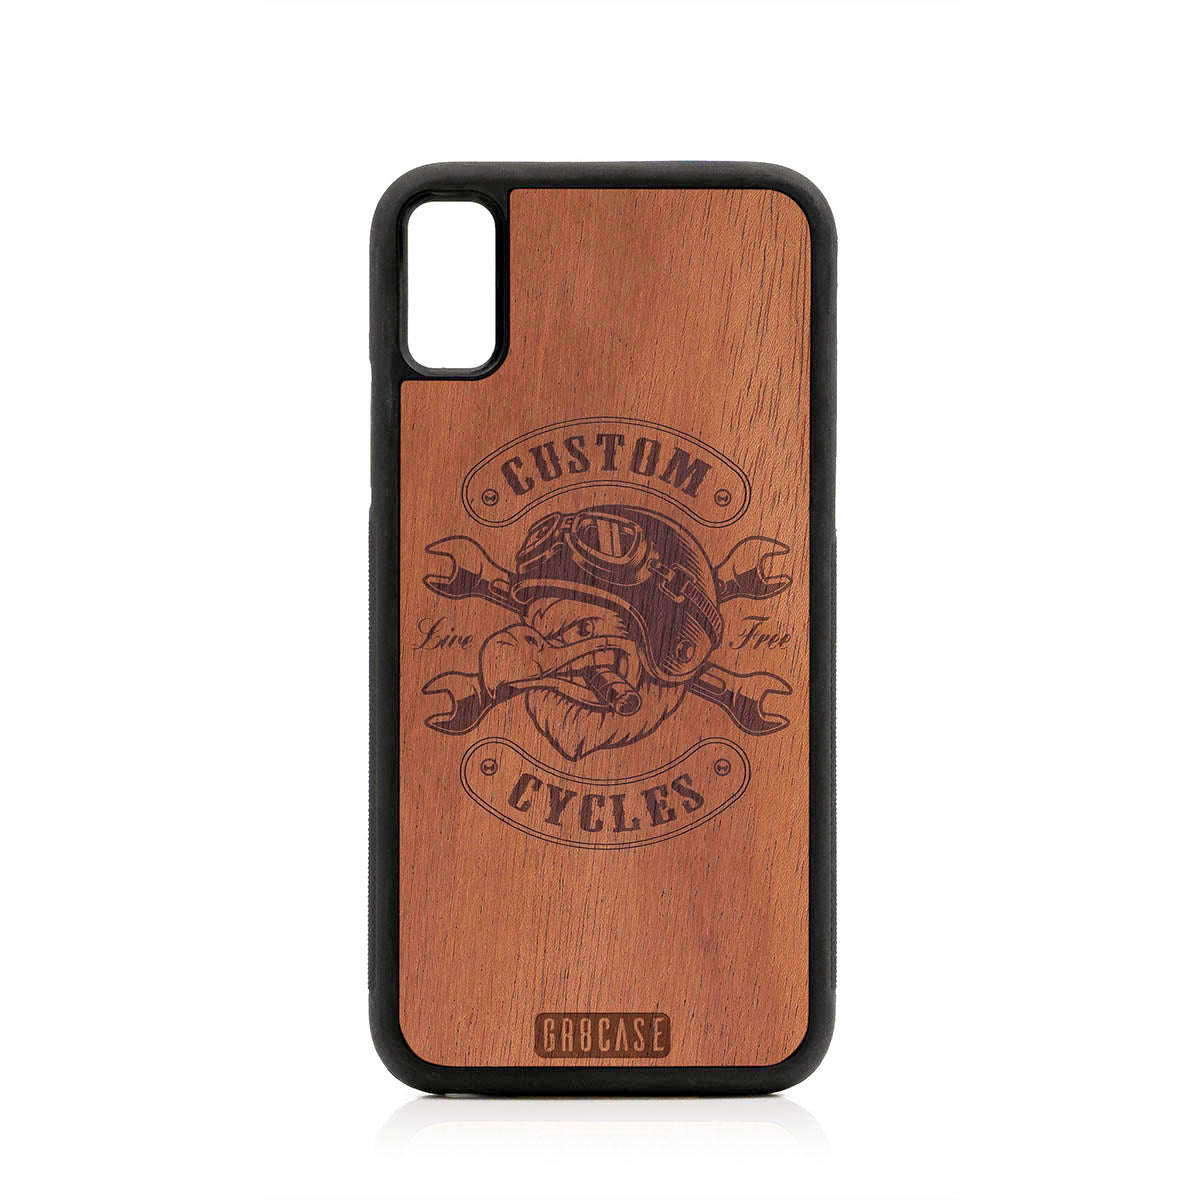 Custom Cycles Live Free (Biker Eagle) Design Wood Case For iPhone X/XS by GR8CASE